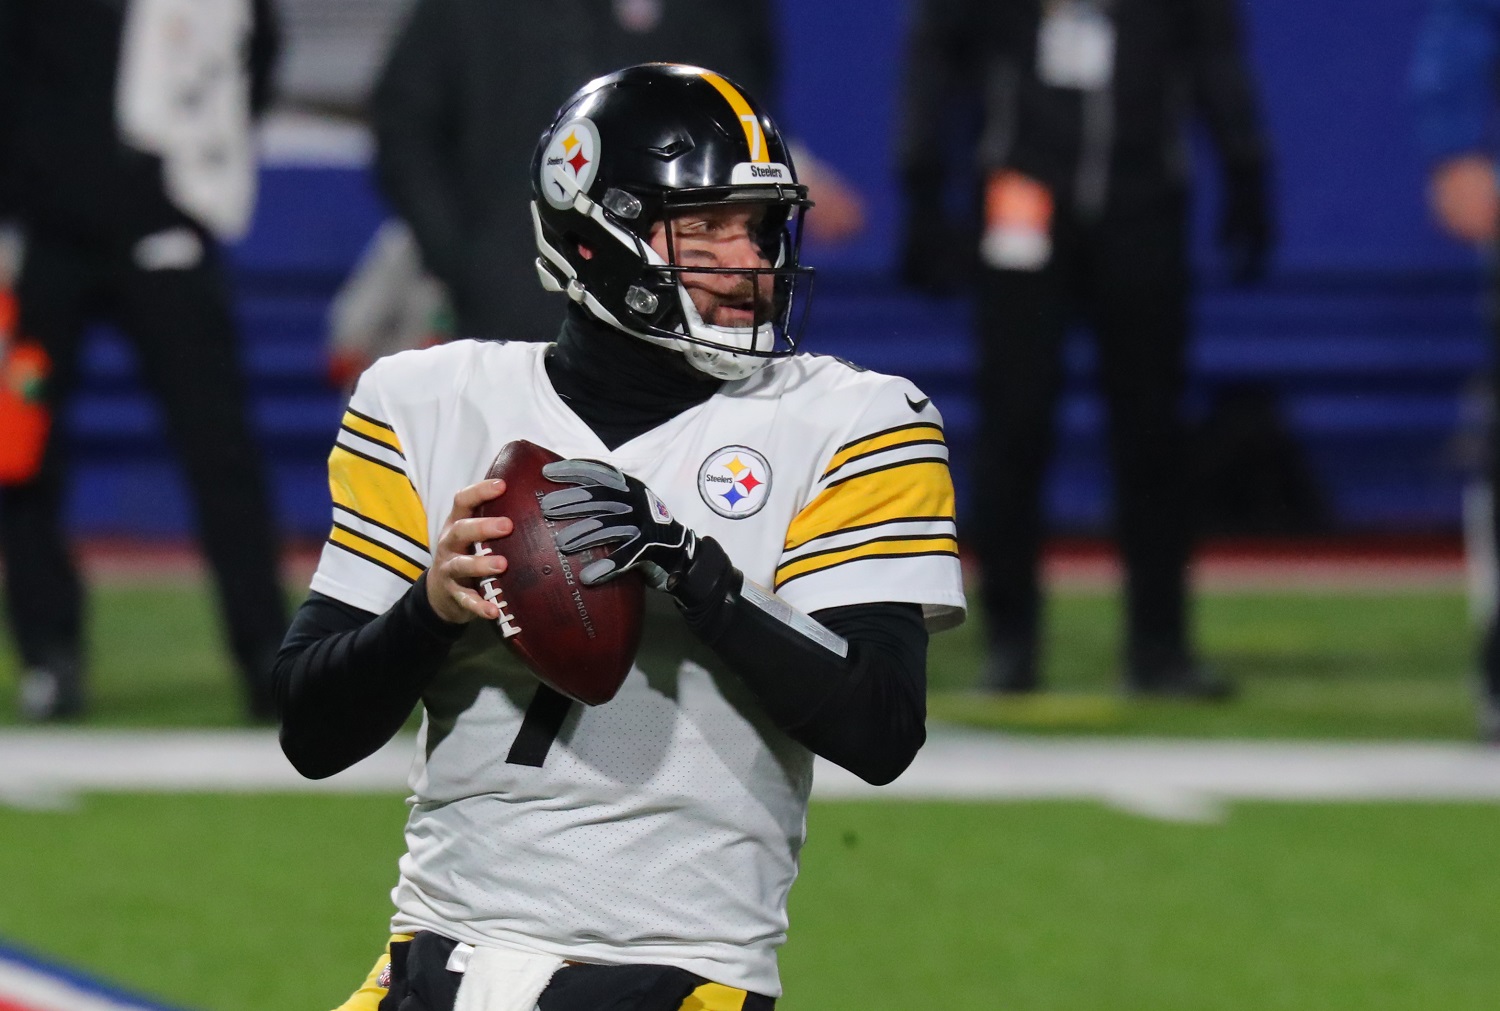 Ben Roethlisberger of the Pittsburgh Steelers looks to throw against the Buffalo Bills on Dec. 13, 2020, in Orchard Park, New York.